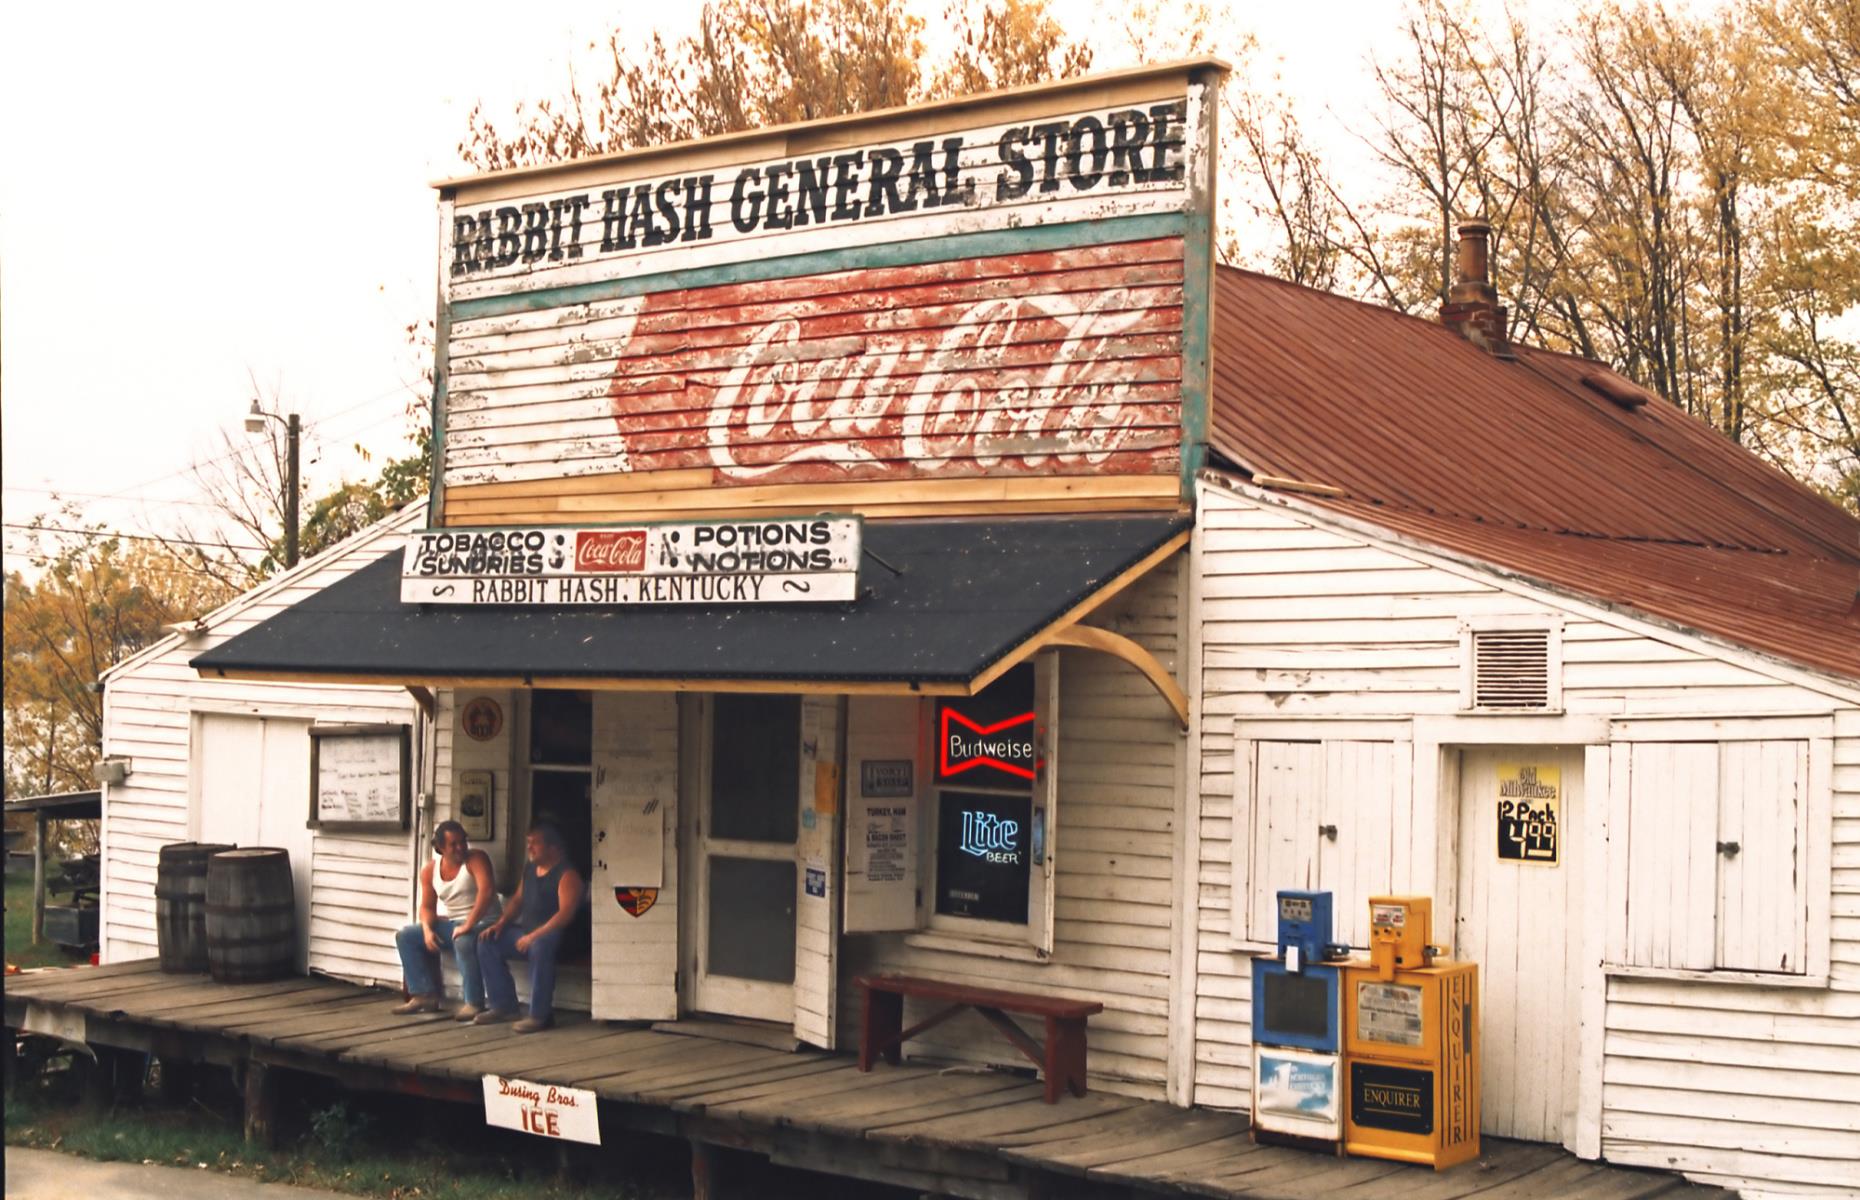 <p>The town of <a href="https://www.rabbithash.com/">Rabbit Hash, Kentucky</a> was founded circa 1813 and locals claim that it hasn’t changed a whole lot since. The town’s general store opened in 1831 and has survived not only the passage of time, but substantial flooding courtesy of the Ohio River. Yet, it still remains, selling locally made candy and jelly, soaps, crafts and antiques. There’s also a museum in the town, detailing the history of this quirky little community.</p>